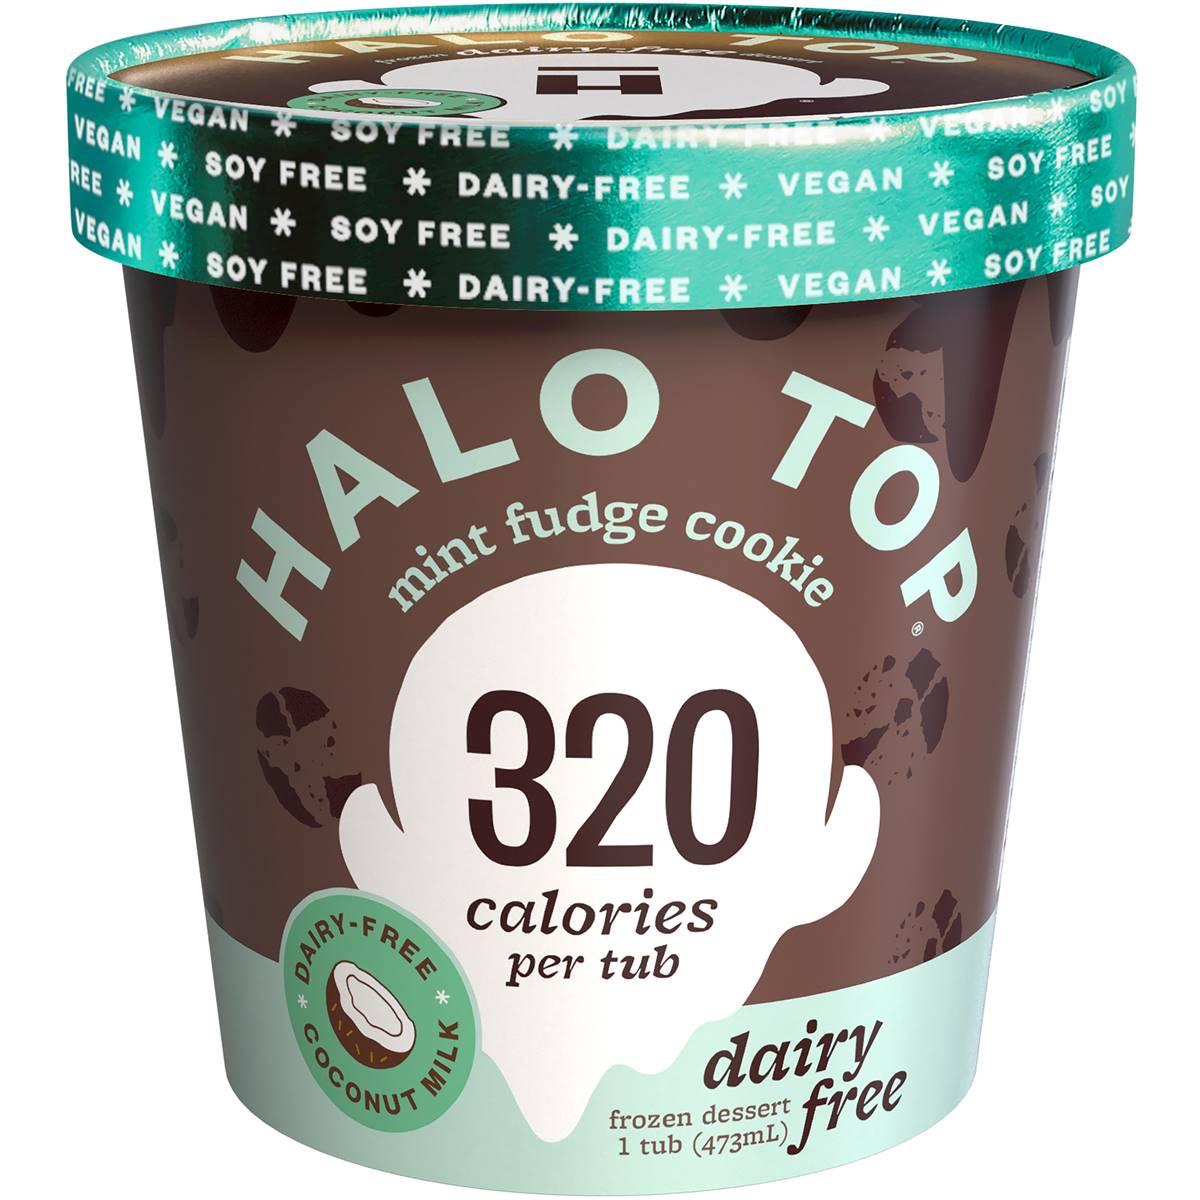 Calories in Halo Top Dairy Free Mint Fudge Cookie